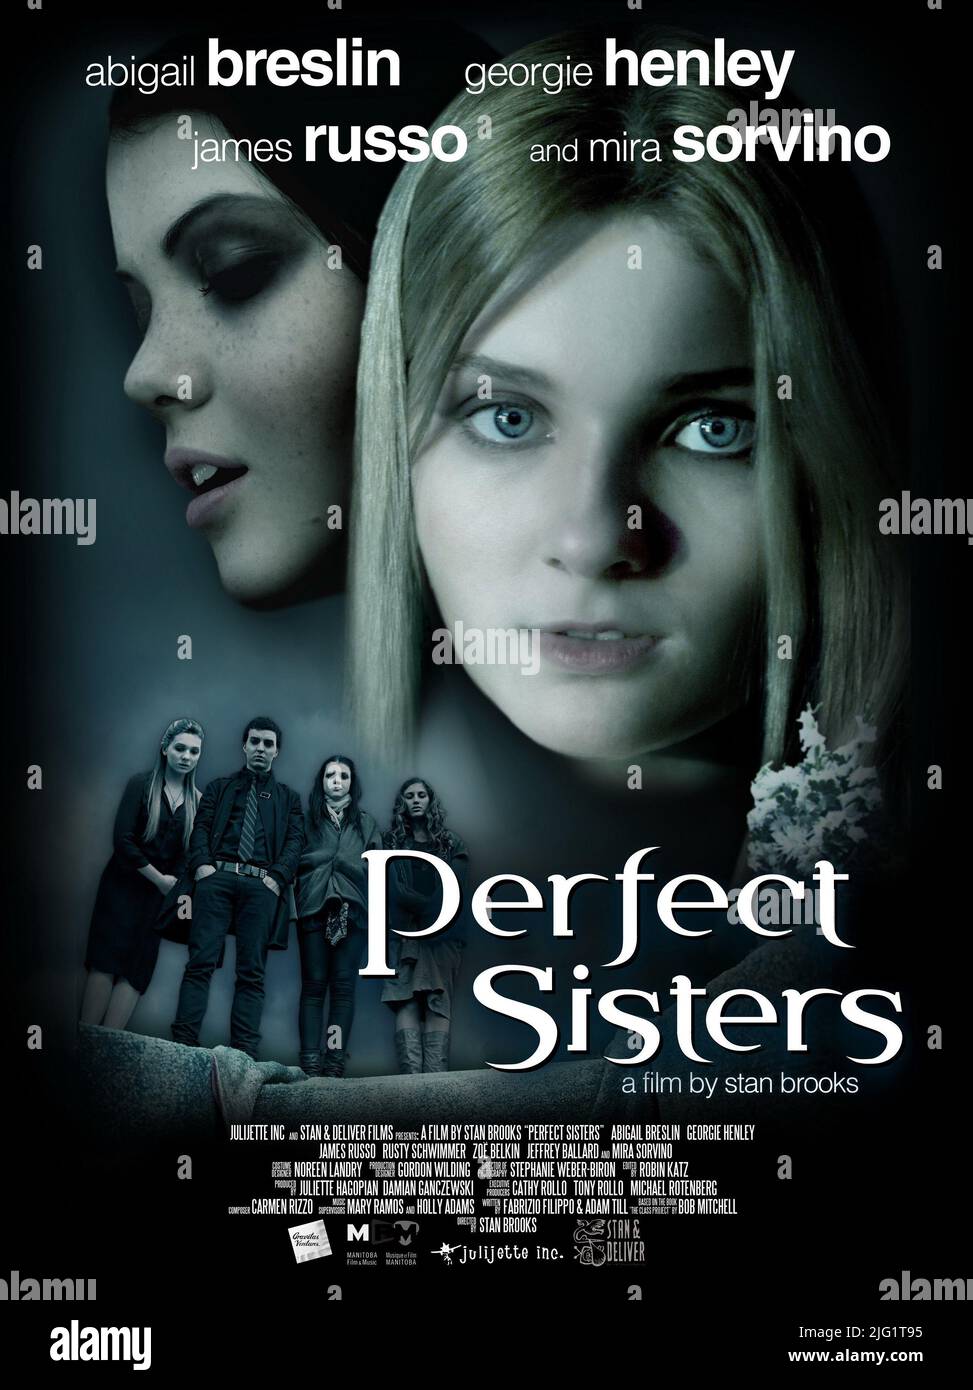 GEORGIE HENLEY, ABIGAIL BRESLIN POSTER, PERFECT SISTERS, 2014 Stock Photo